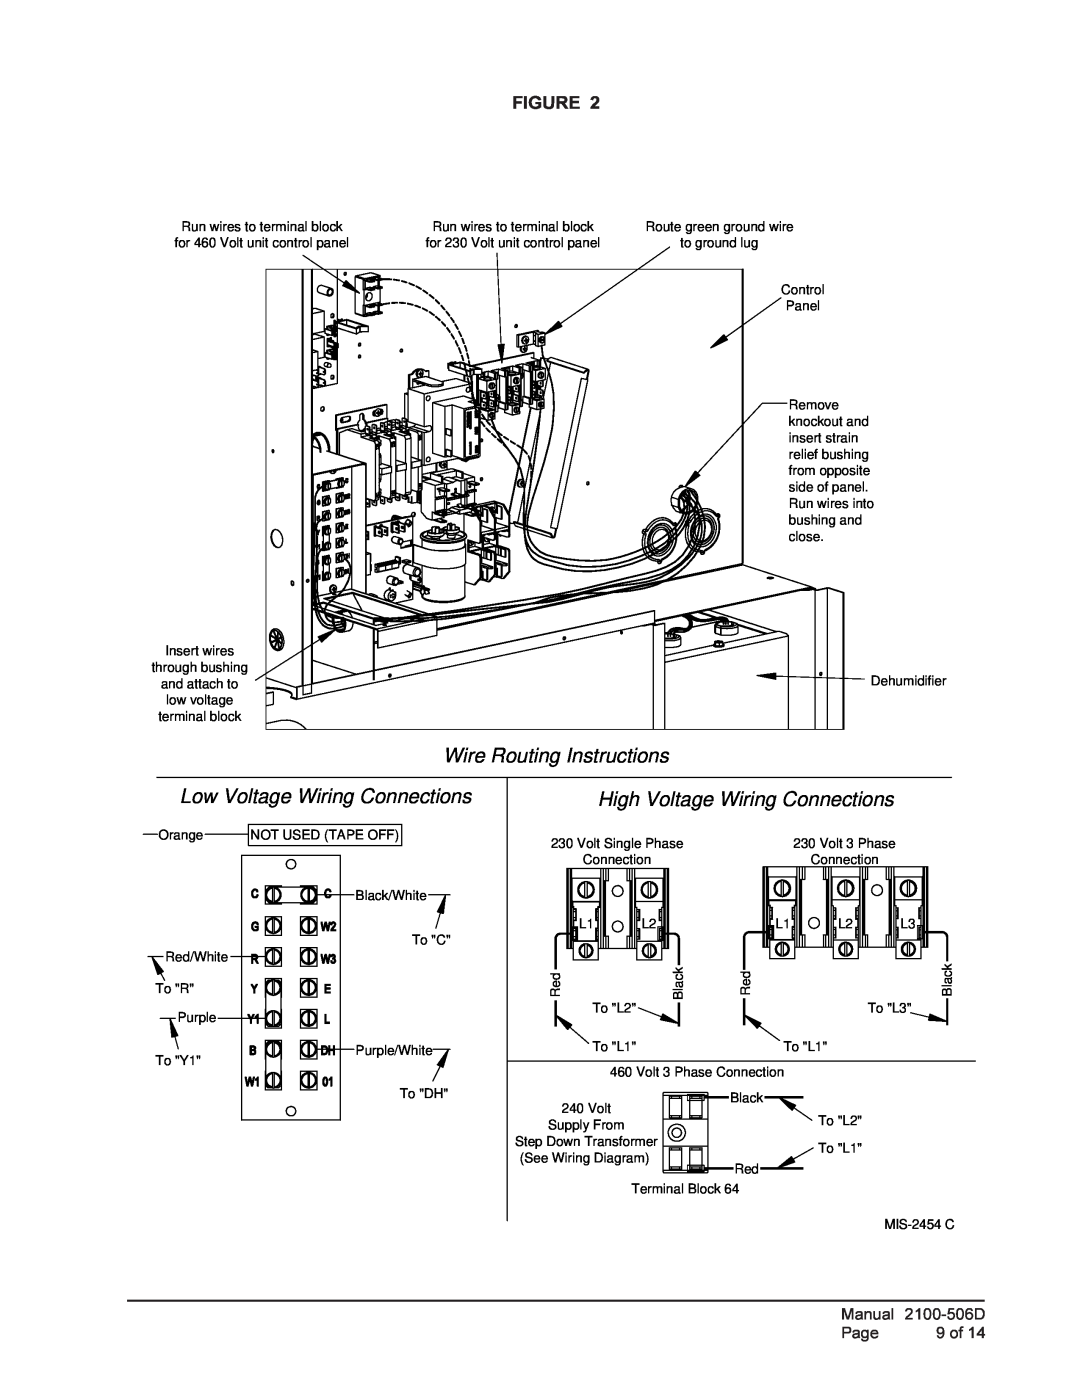 Bard CH4S1, CH5S1, CH3S1 Wire Routing Instructions, Low Voltage Wiring Connections, High Voltage Wiring Connections 